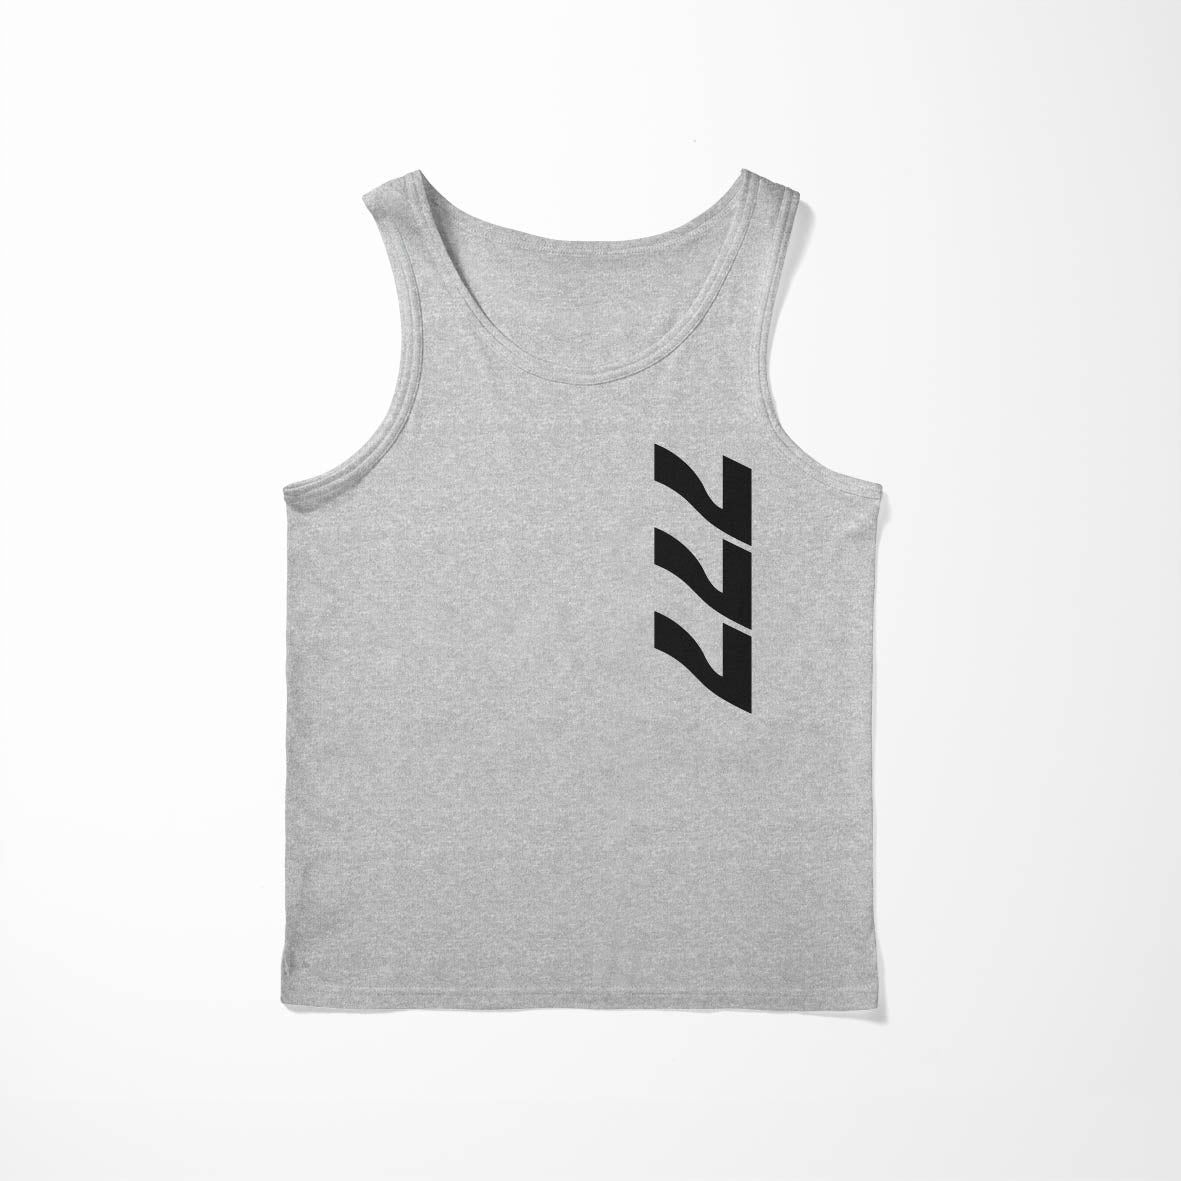 777 Side Text Designed Tank Tops